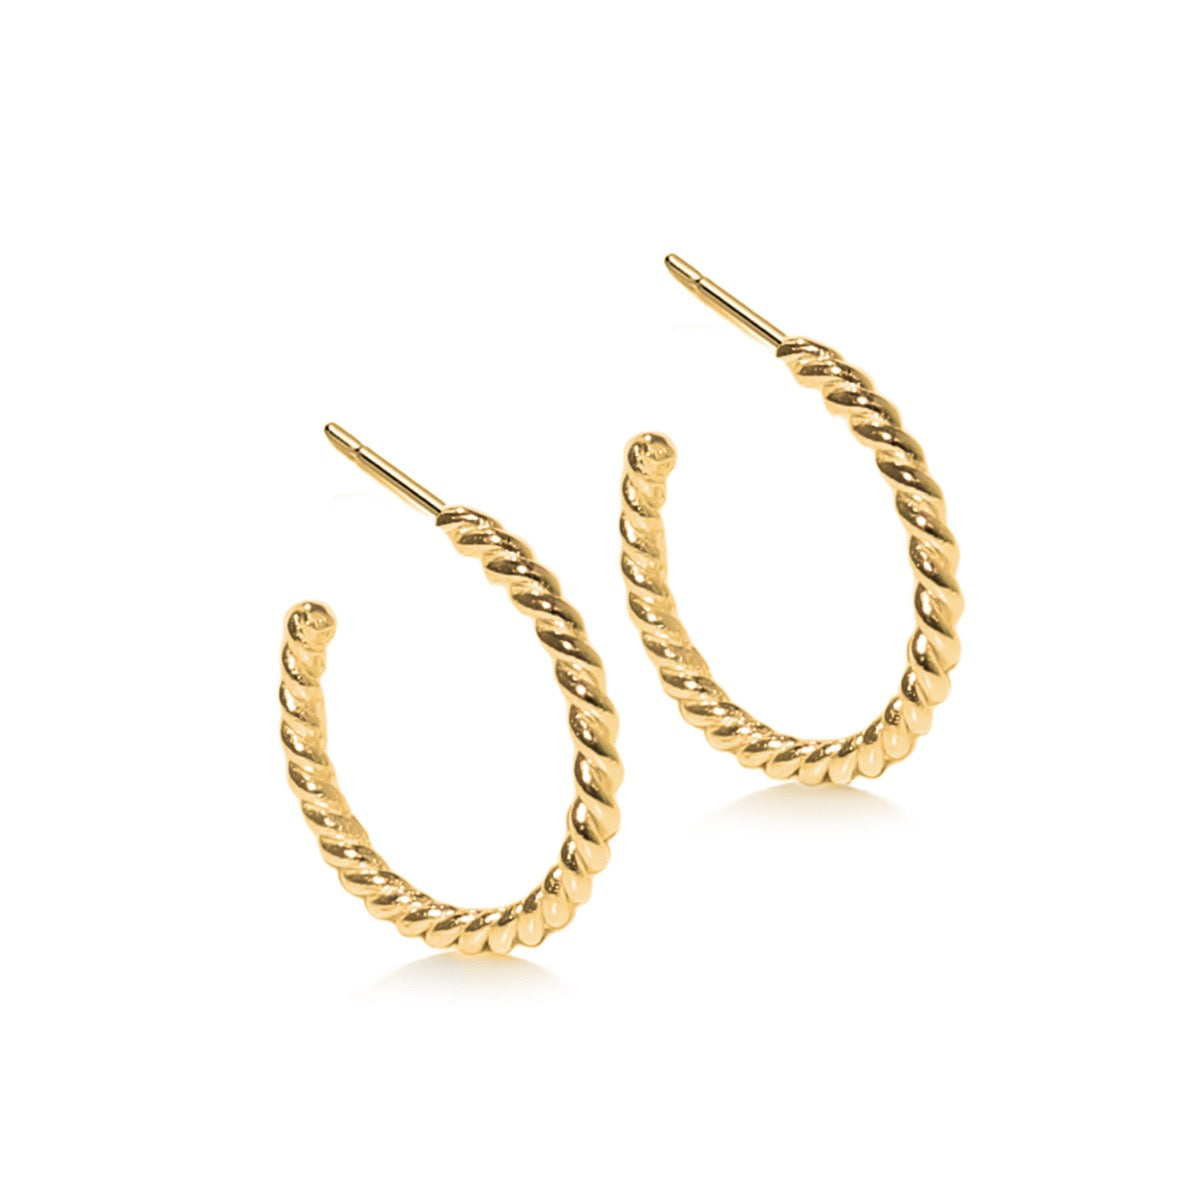 Gold plated and silver twisted rope hoop earrings. 